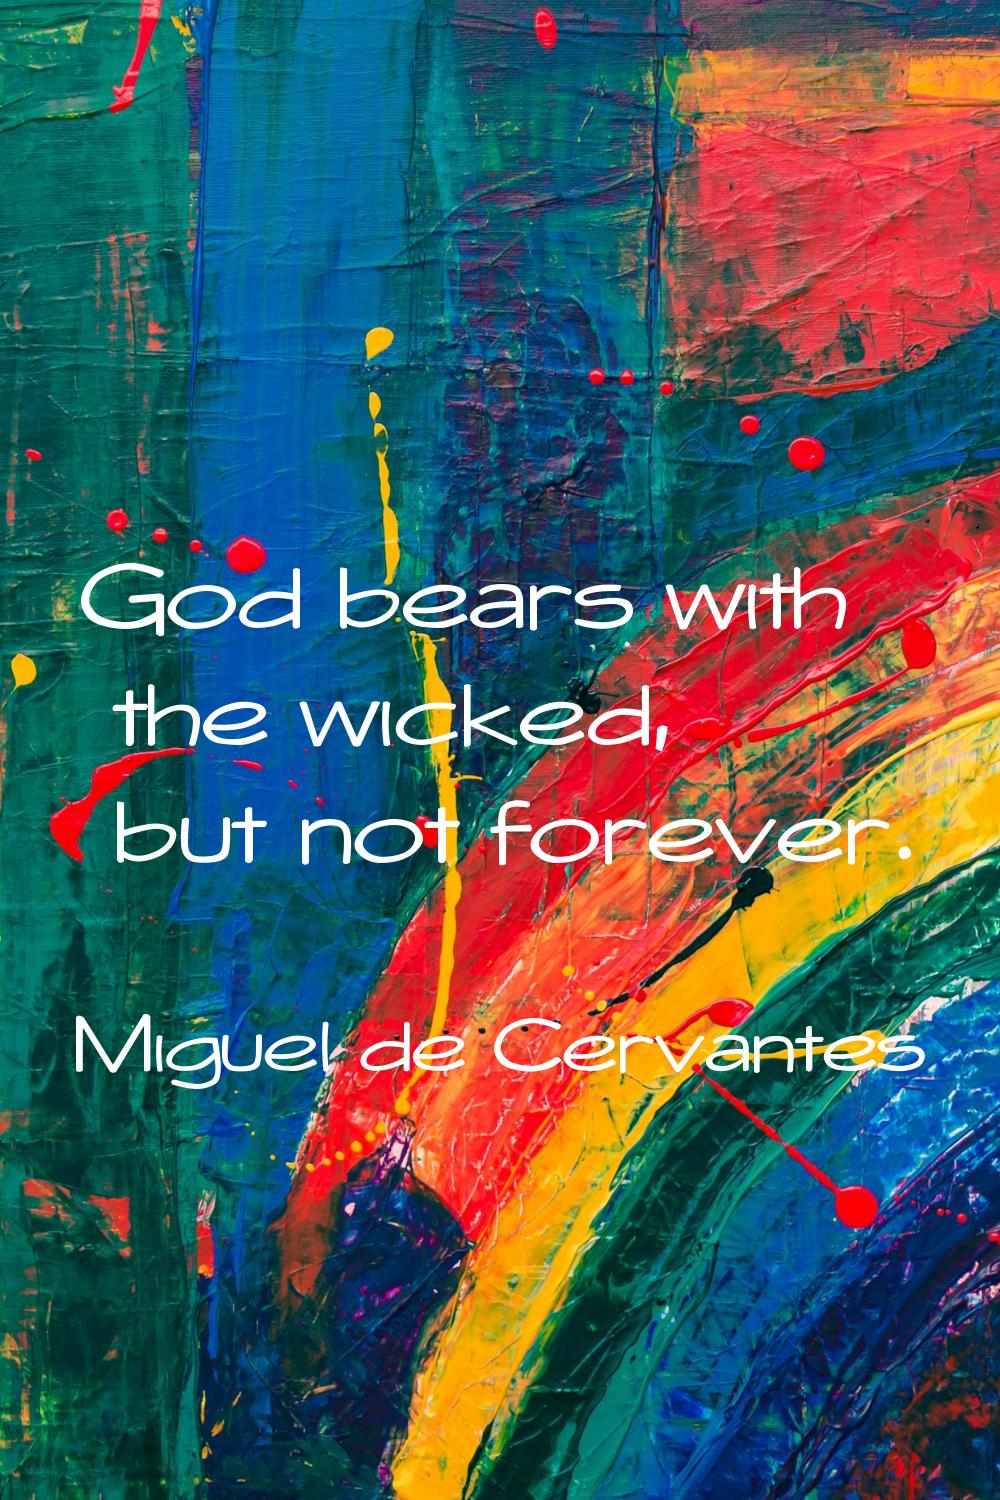 God bears with the wicked, but not forever.